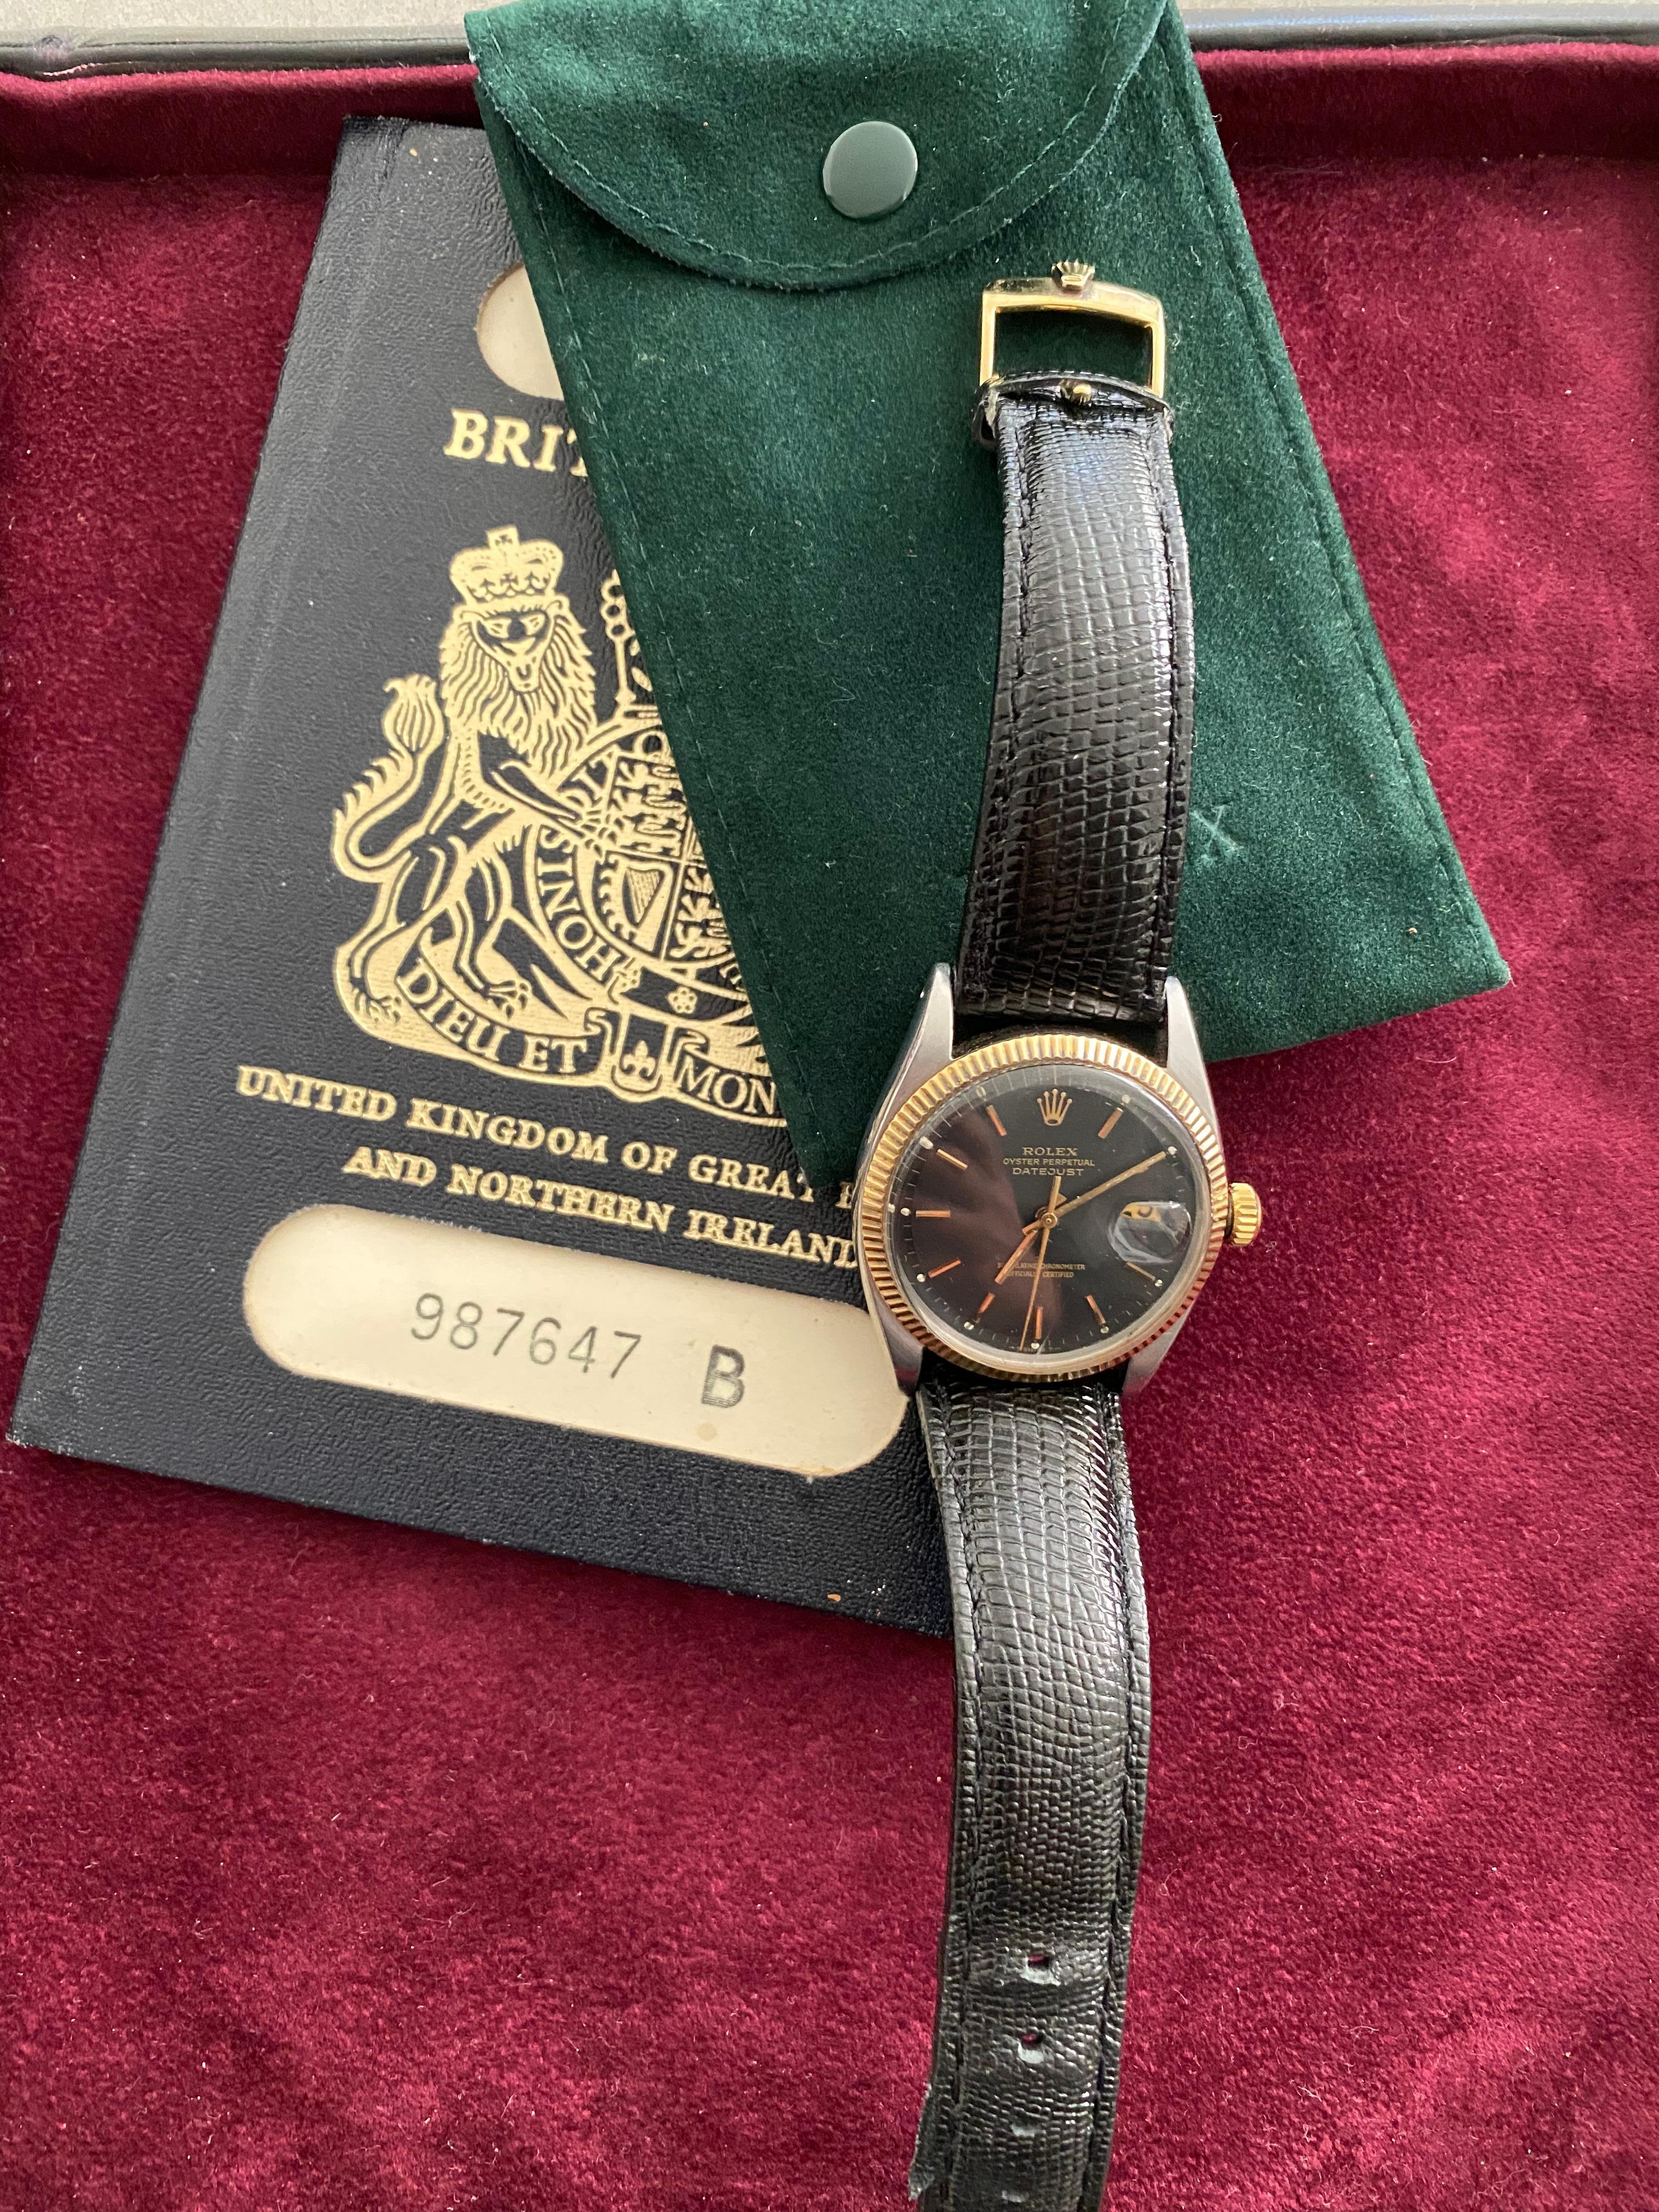 Rolex Oyster Datejust SS Automatic 1970s Vintage
Black face, gold crown and bezel. 

Condition Excellent
Repaired: Cleaned and serviced, dial restored to exact specification. Replacements made.
New aftermarket black leather strap, with Rolex buckle.